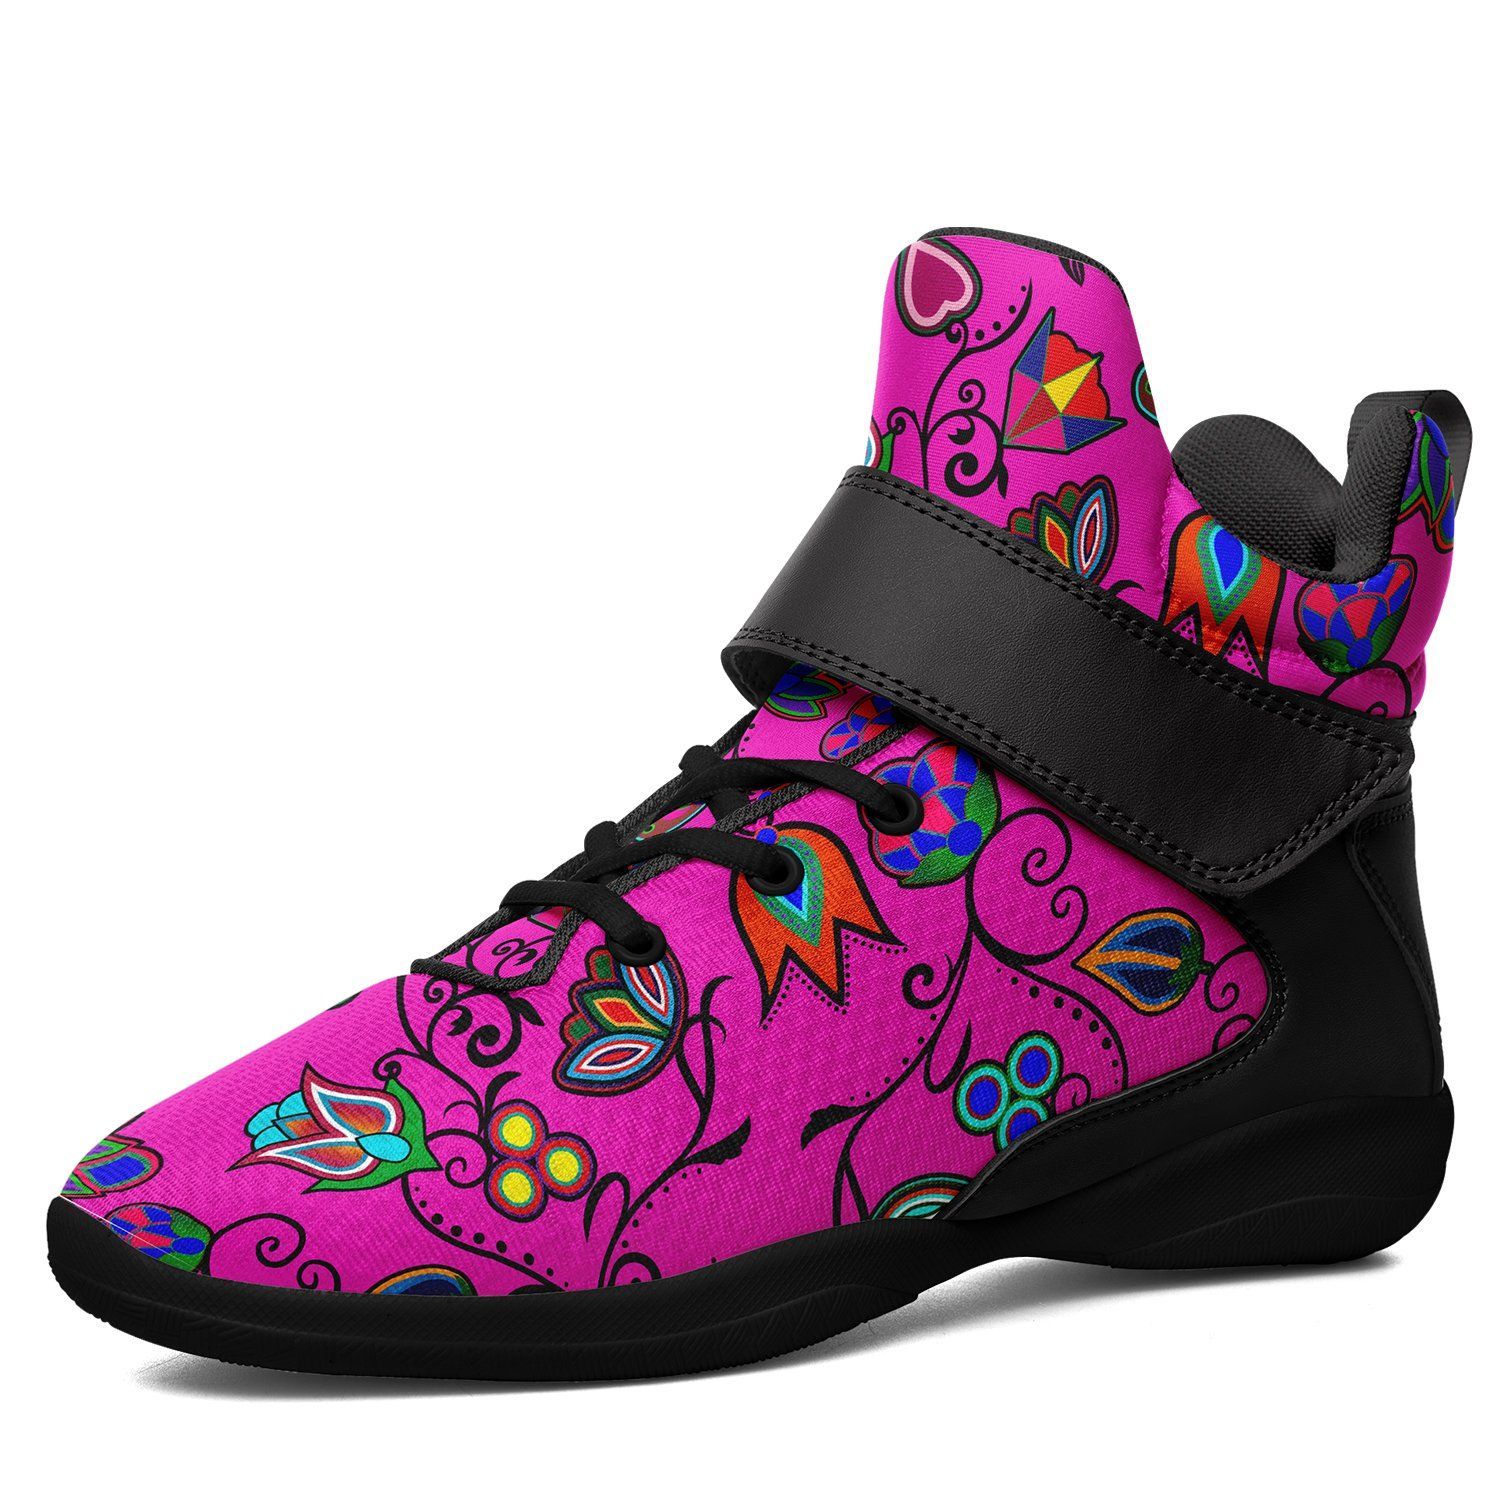 Indigenous Paisley Kid's Ipottaa Basketball / Sport High Top Shoes 49 Dzine US Child 12.5 / EUR 30 Black Sole with Black Strap 